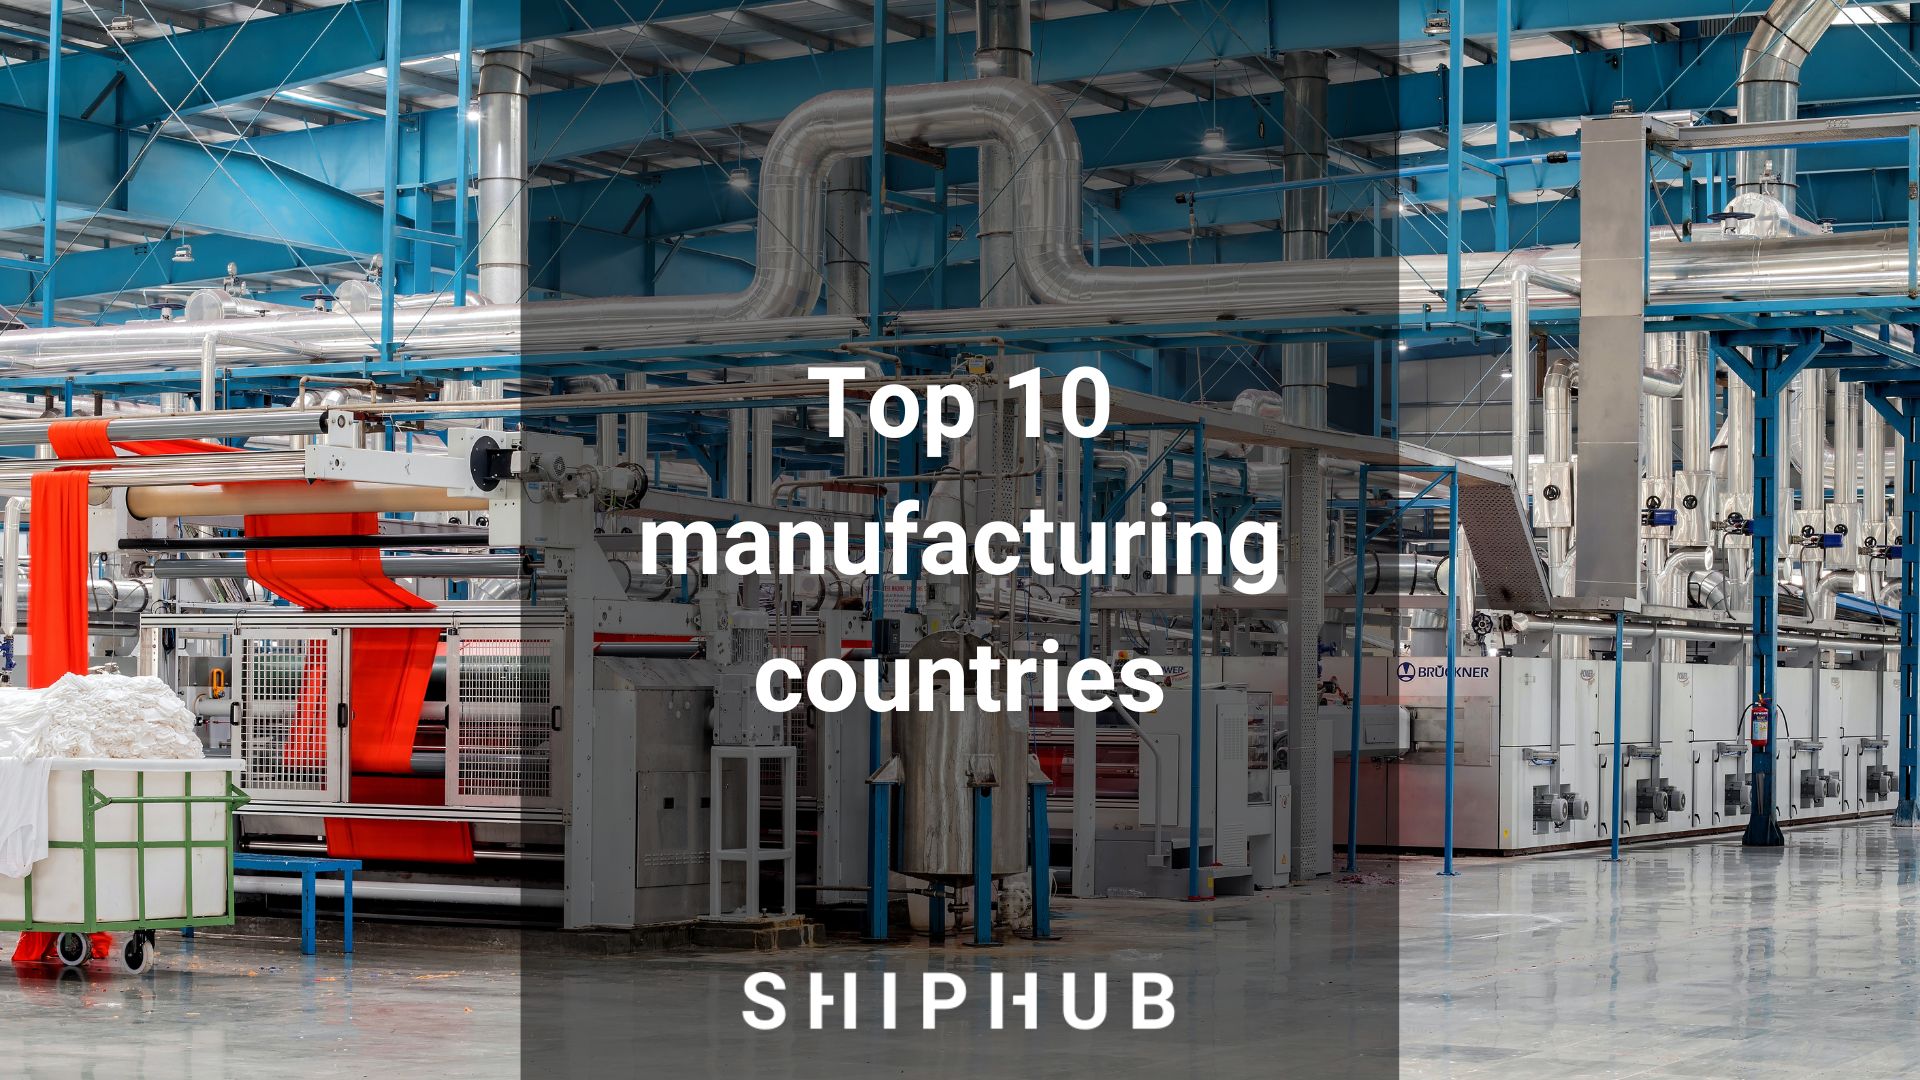 Top 10 manufacturing countries